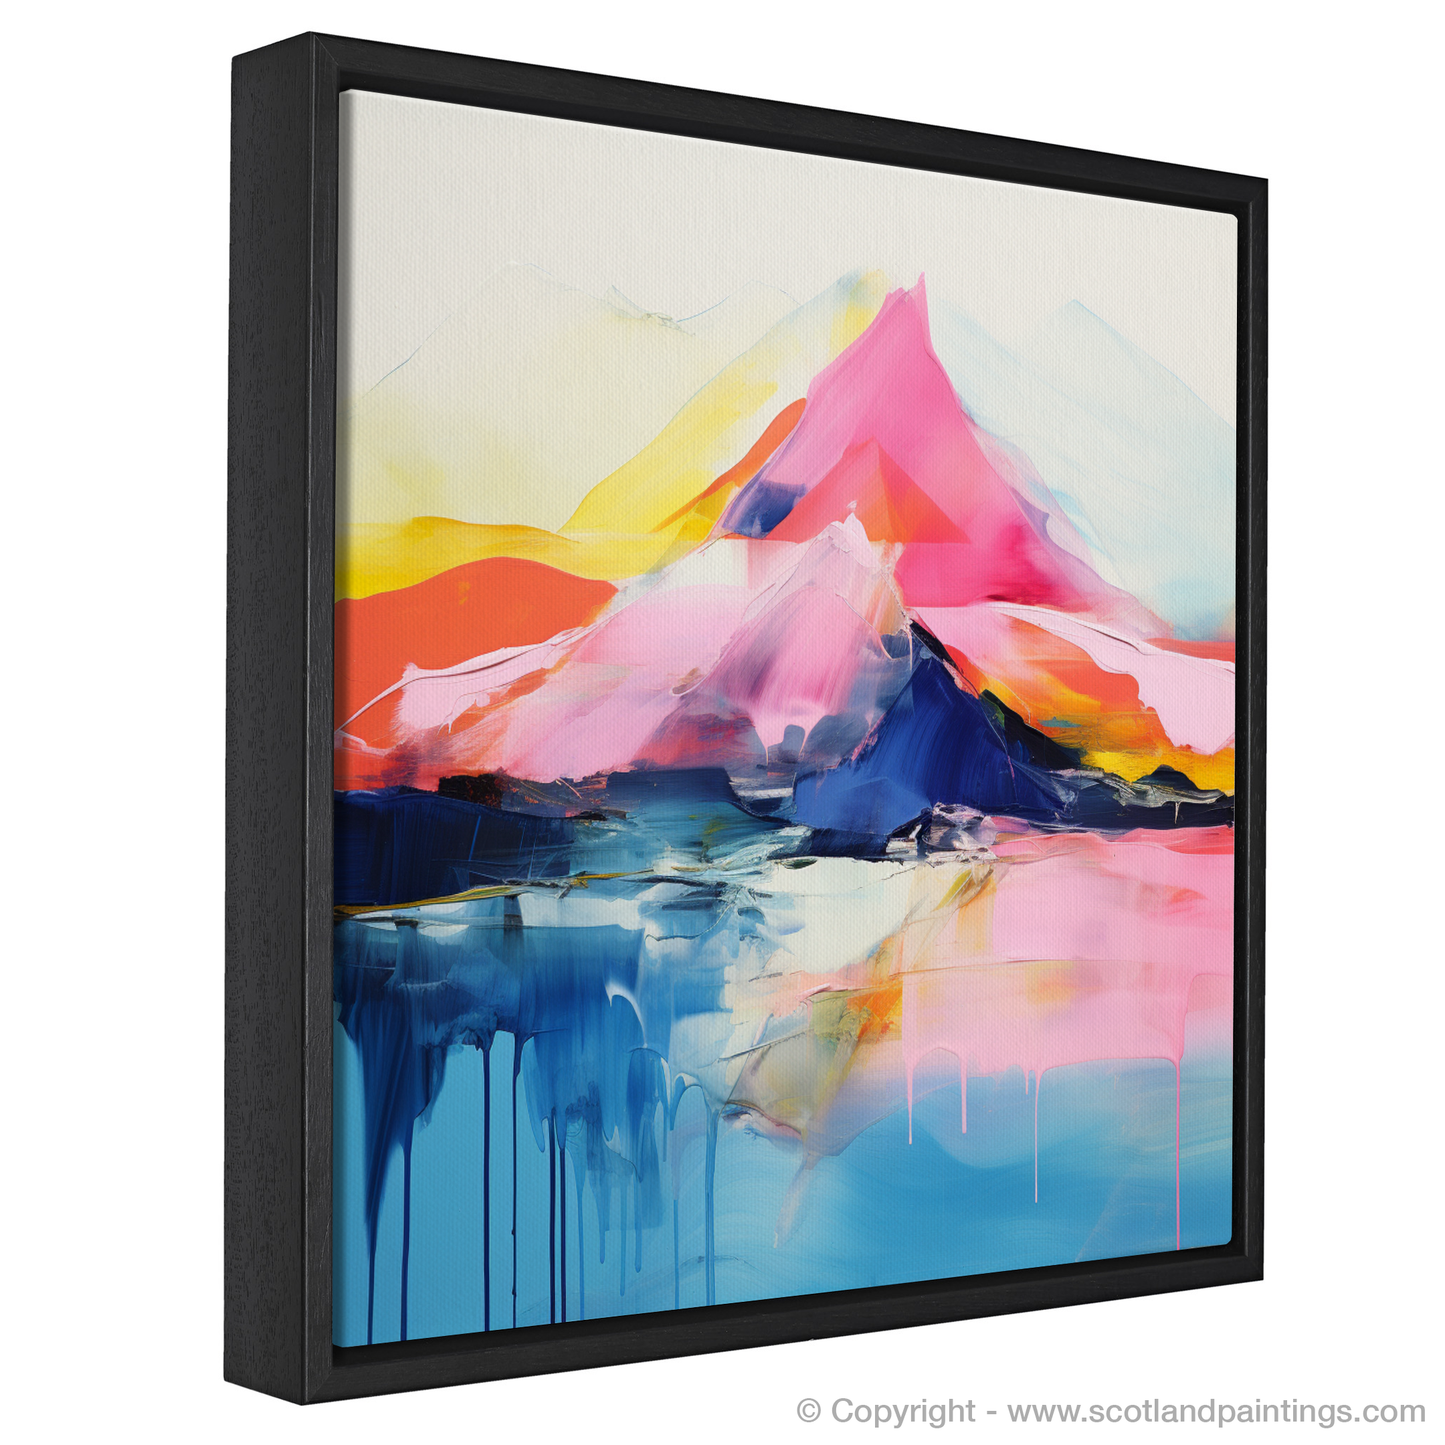 Painting and Art Print of Schiehallion entitled "Schiehallion Reverie: Abstract Ode to the Scottish Highlands".